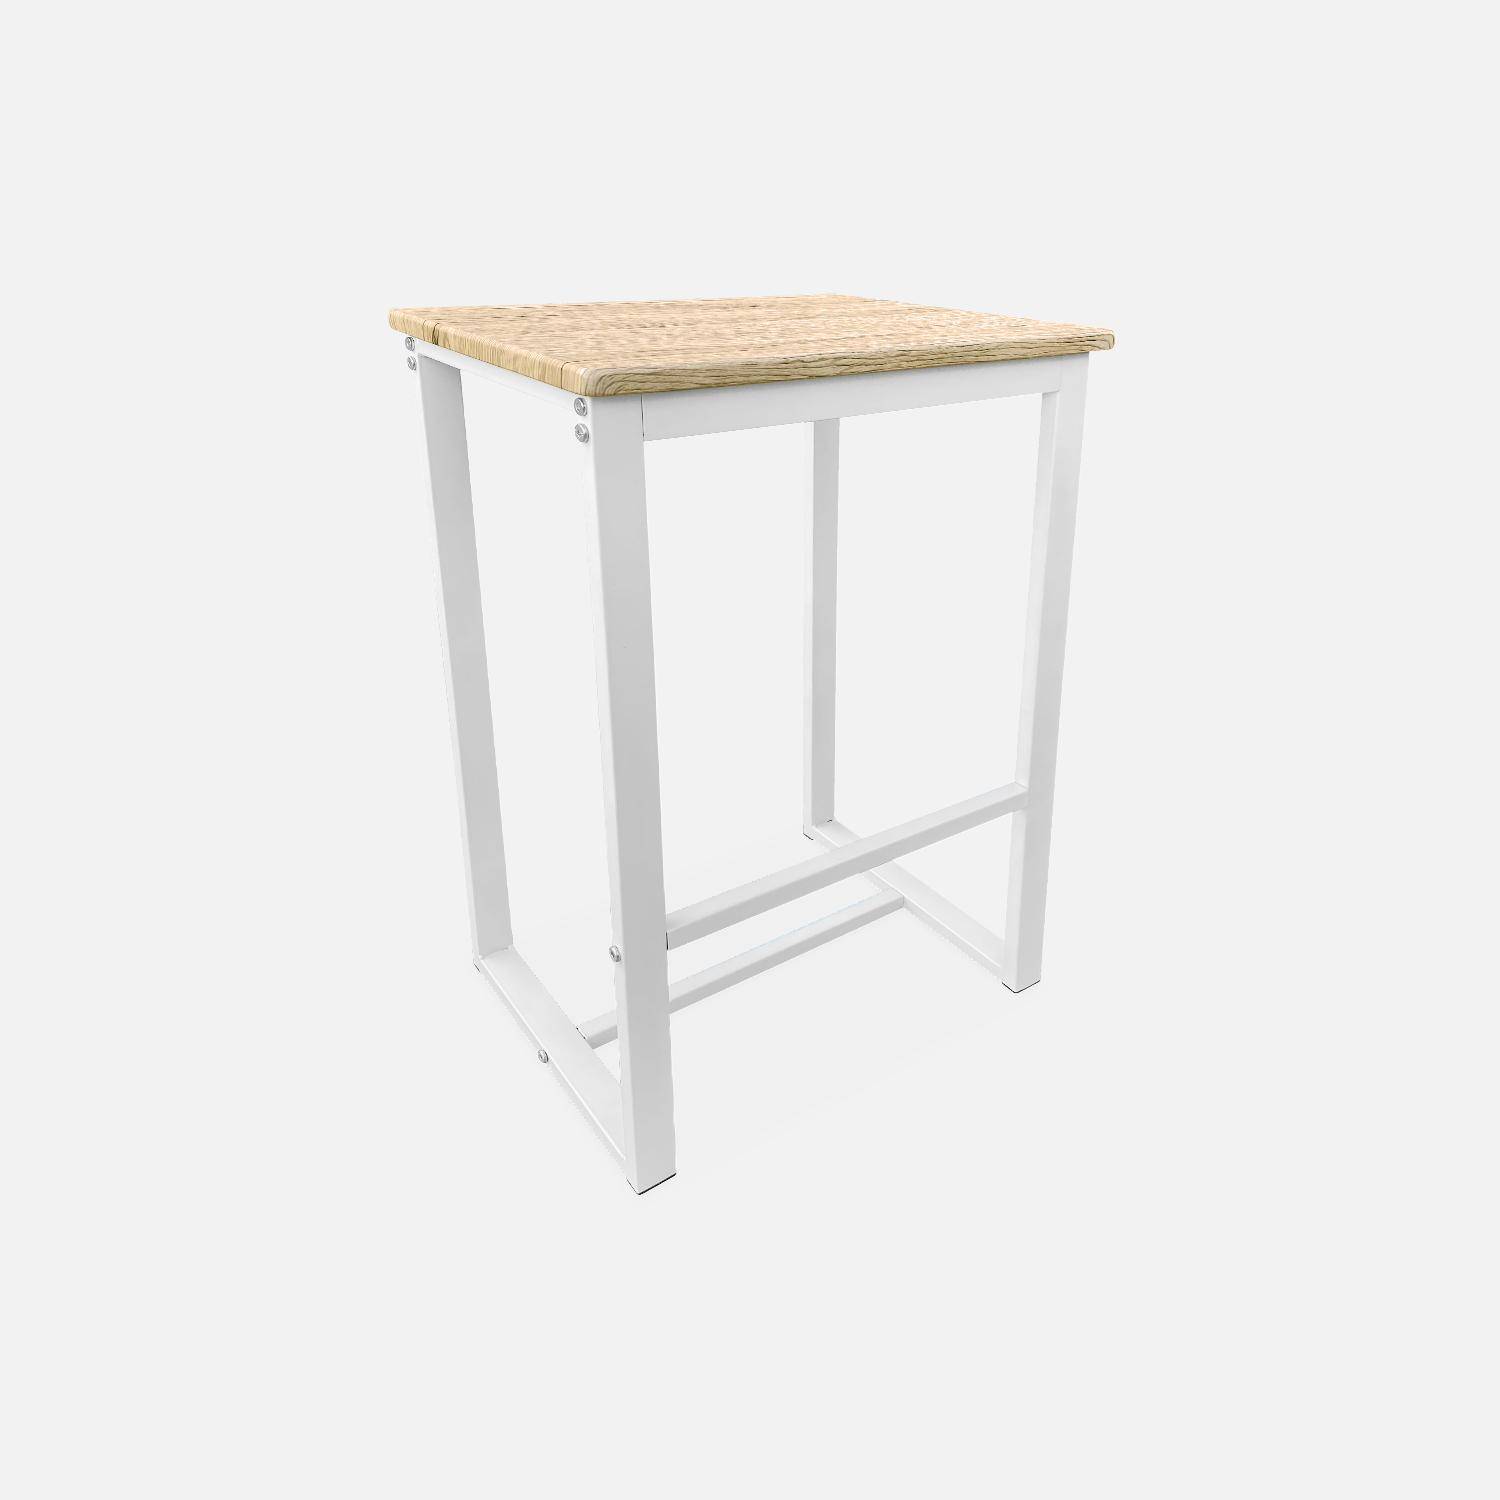 Industrial bar style table set with 2 stools, 60x60x88cm - Loft - white,sweeek,Photo5